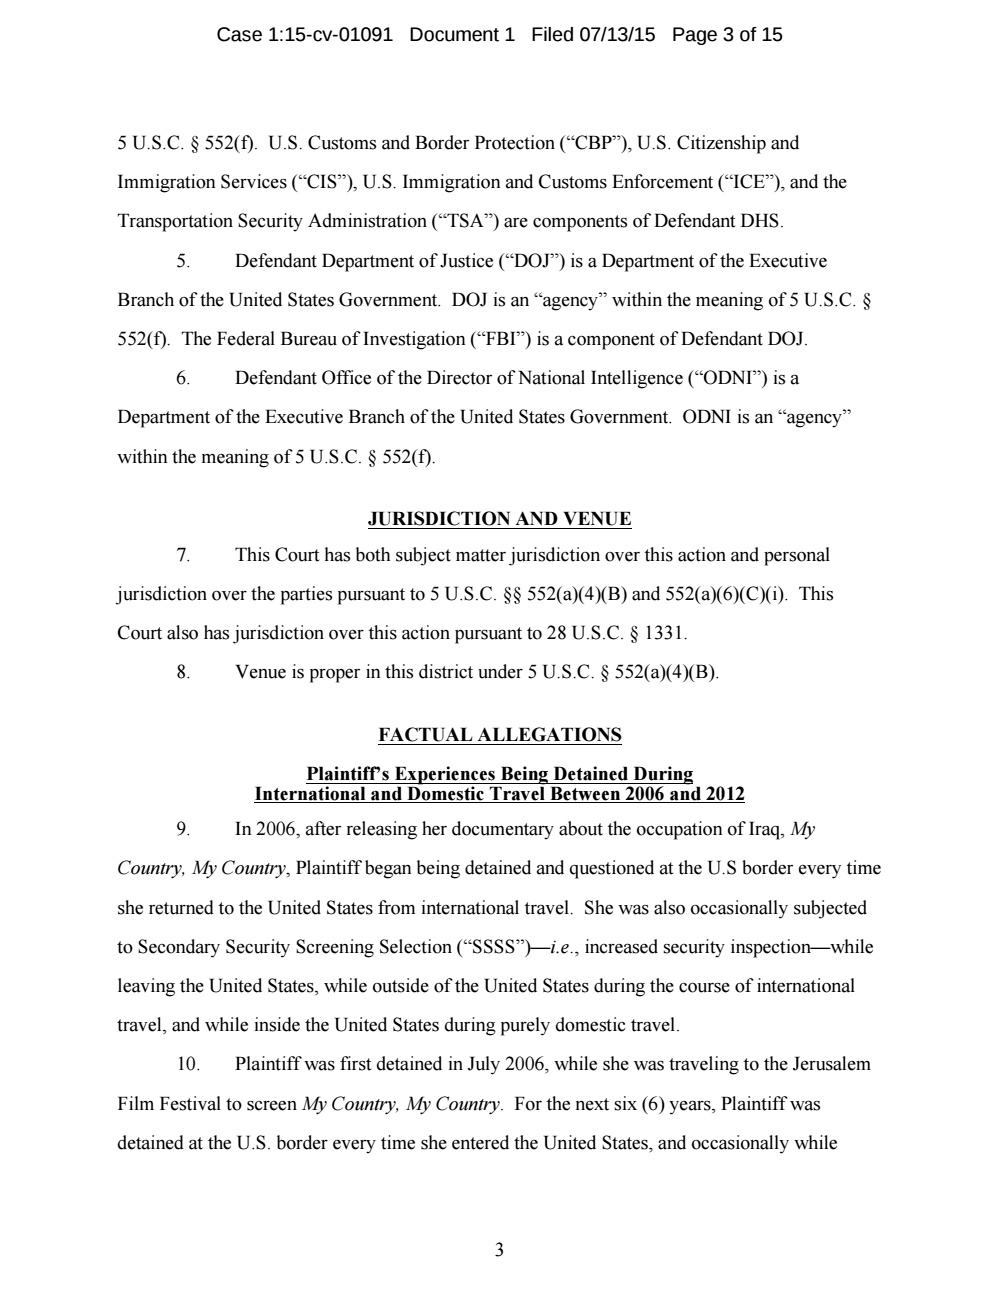 Page 3 from Laura Poitras FOIA Lawsuit